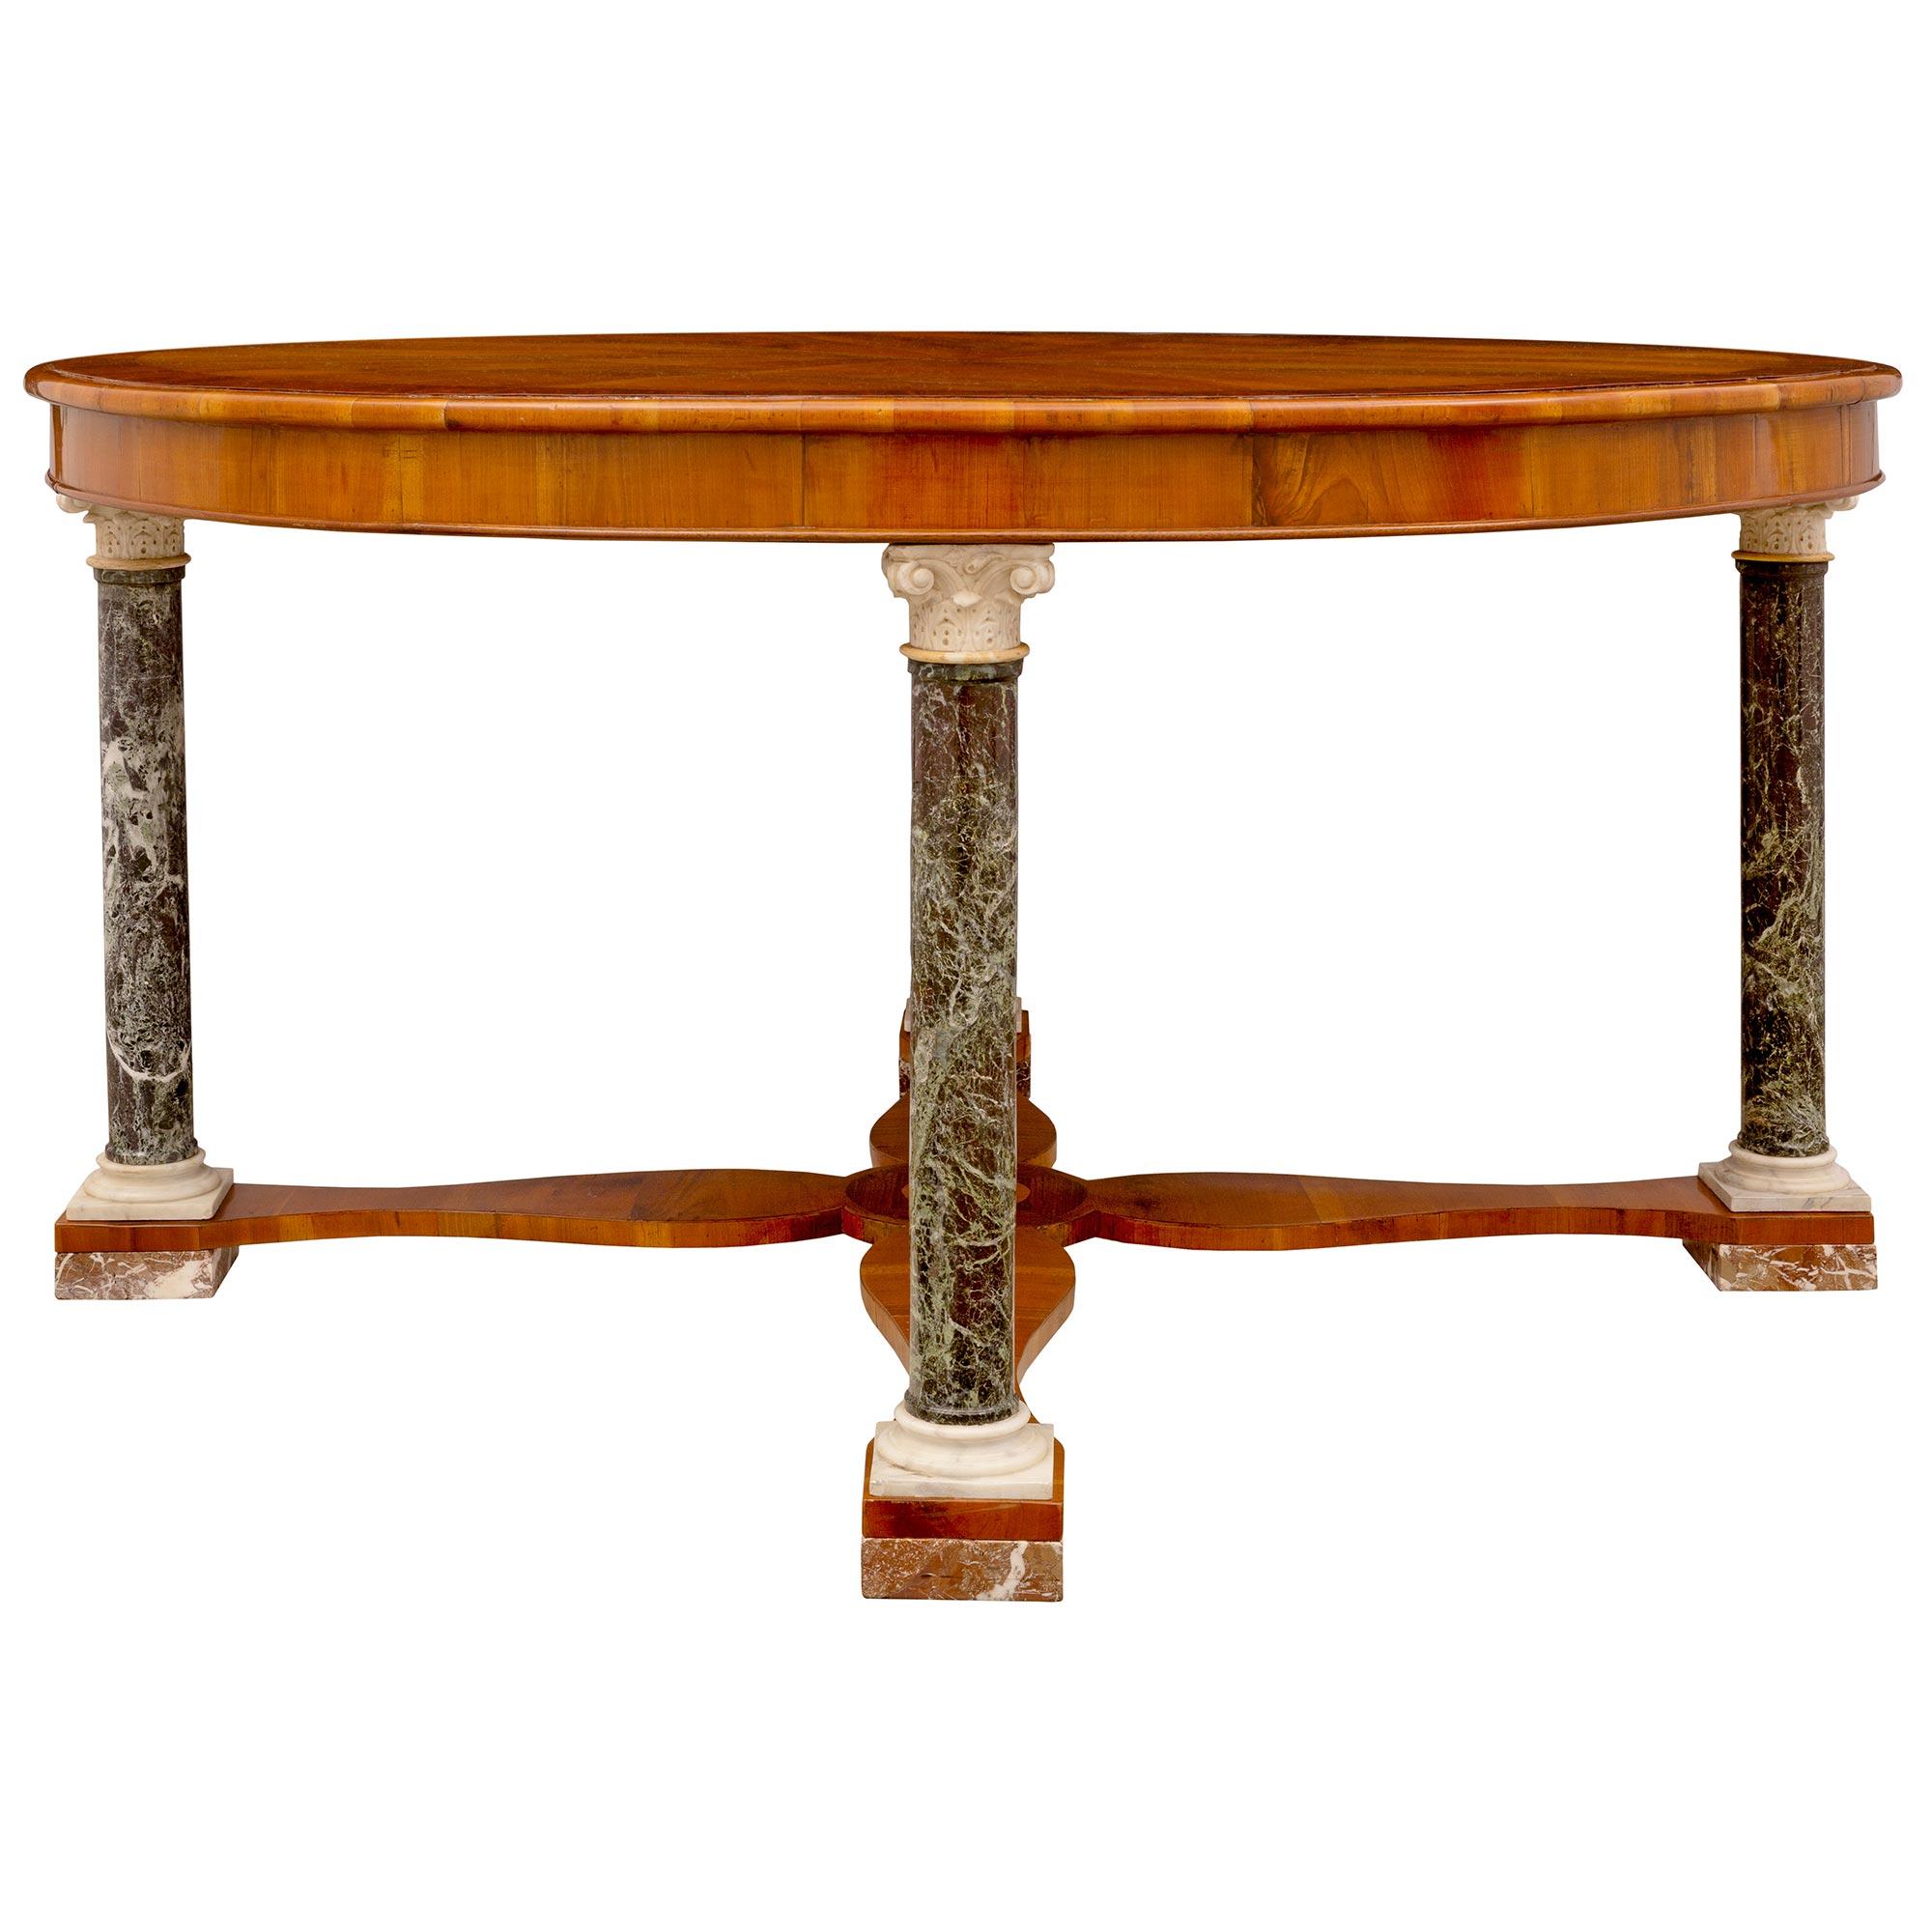 Italian Early 19th Century Walnut and Marble Center Table In Good Condition For Sale In West Palm Beach, FL